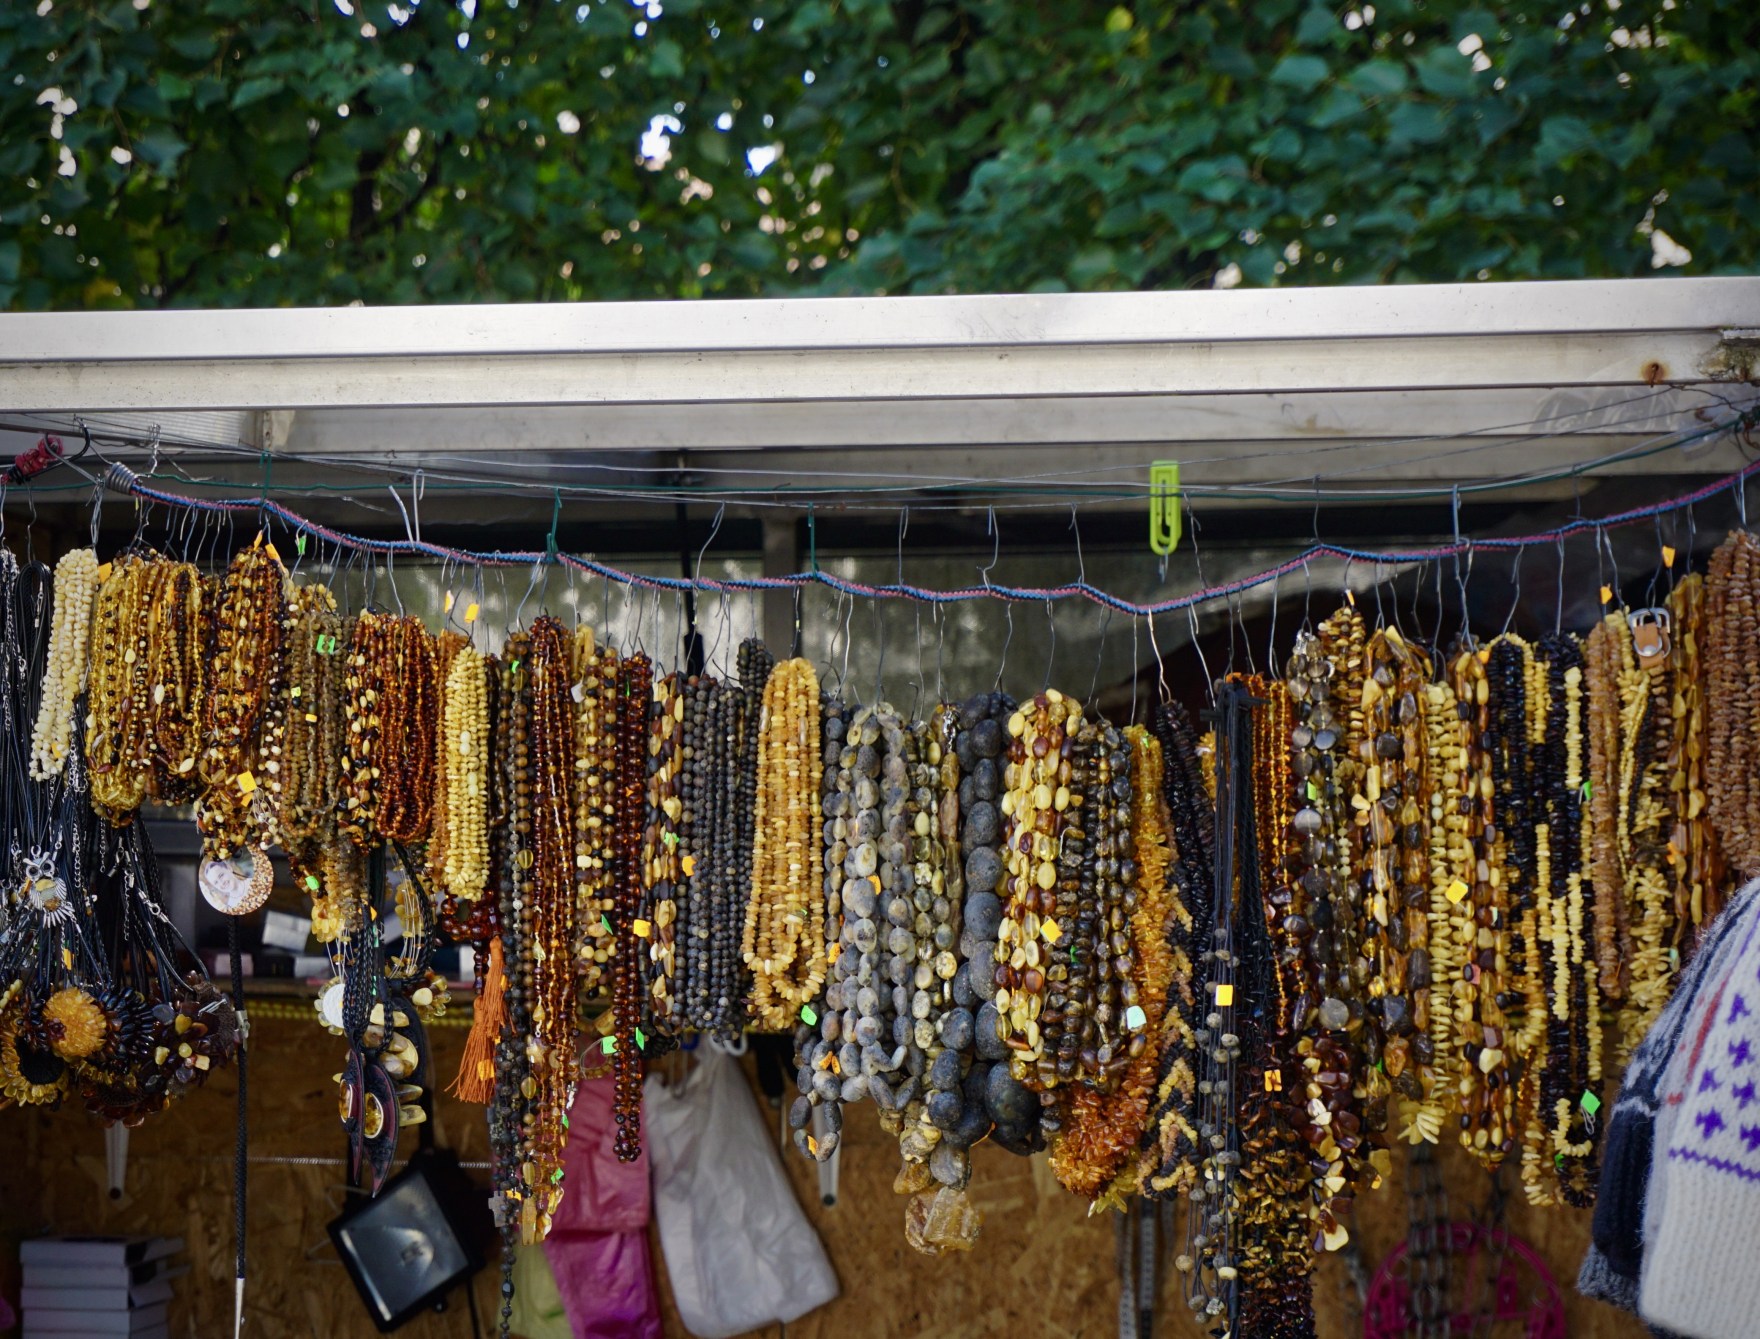 Lithuanian souvenirs - jewellery from amber